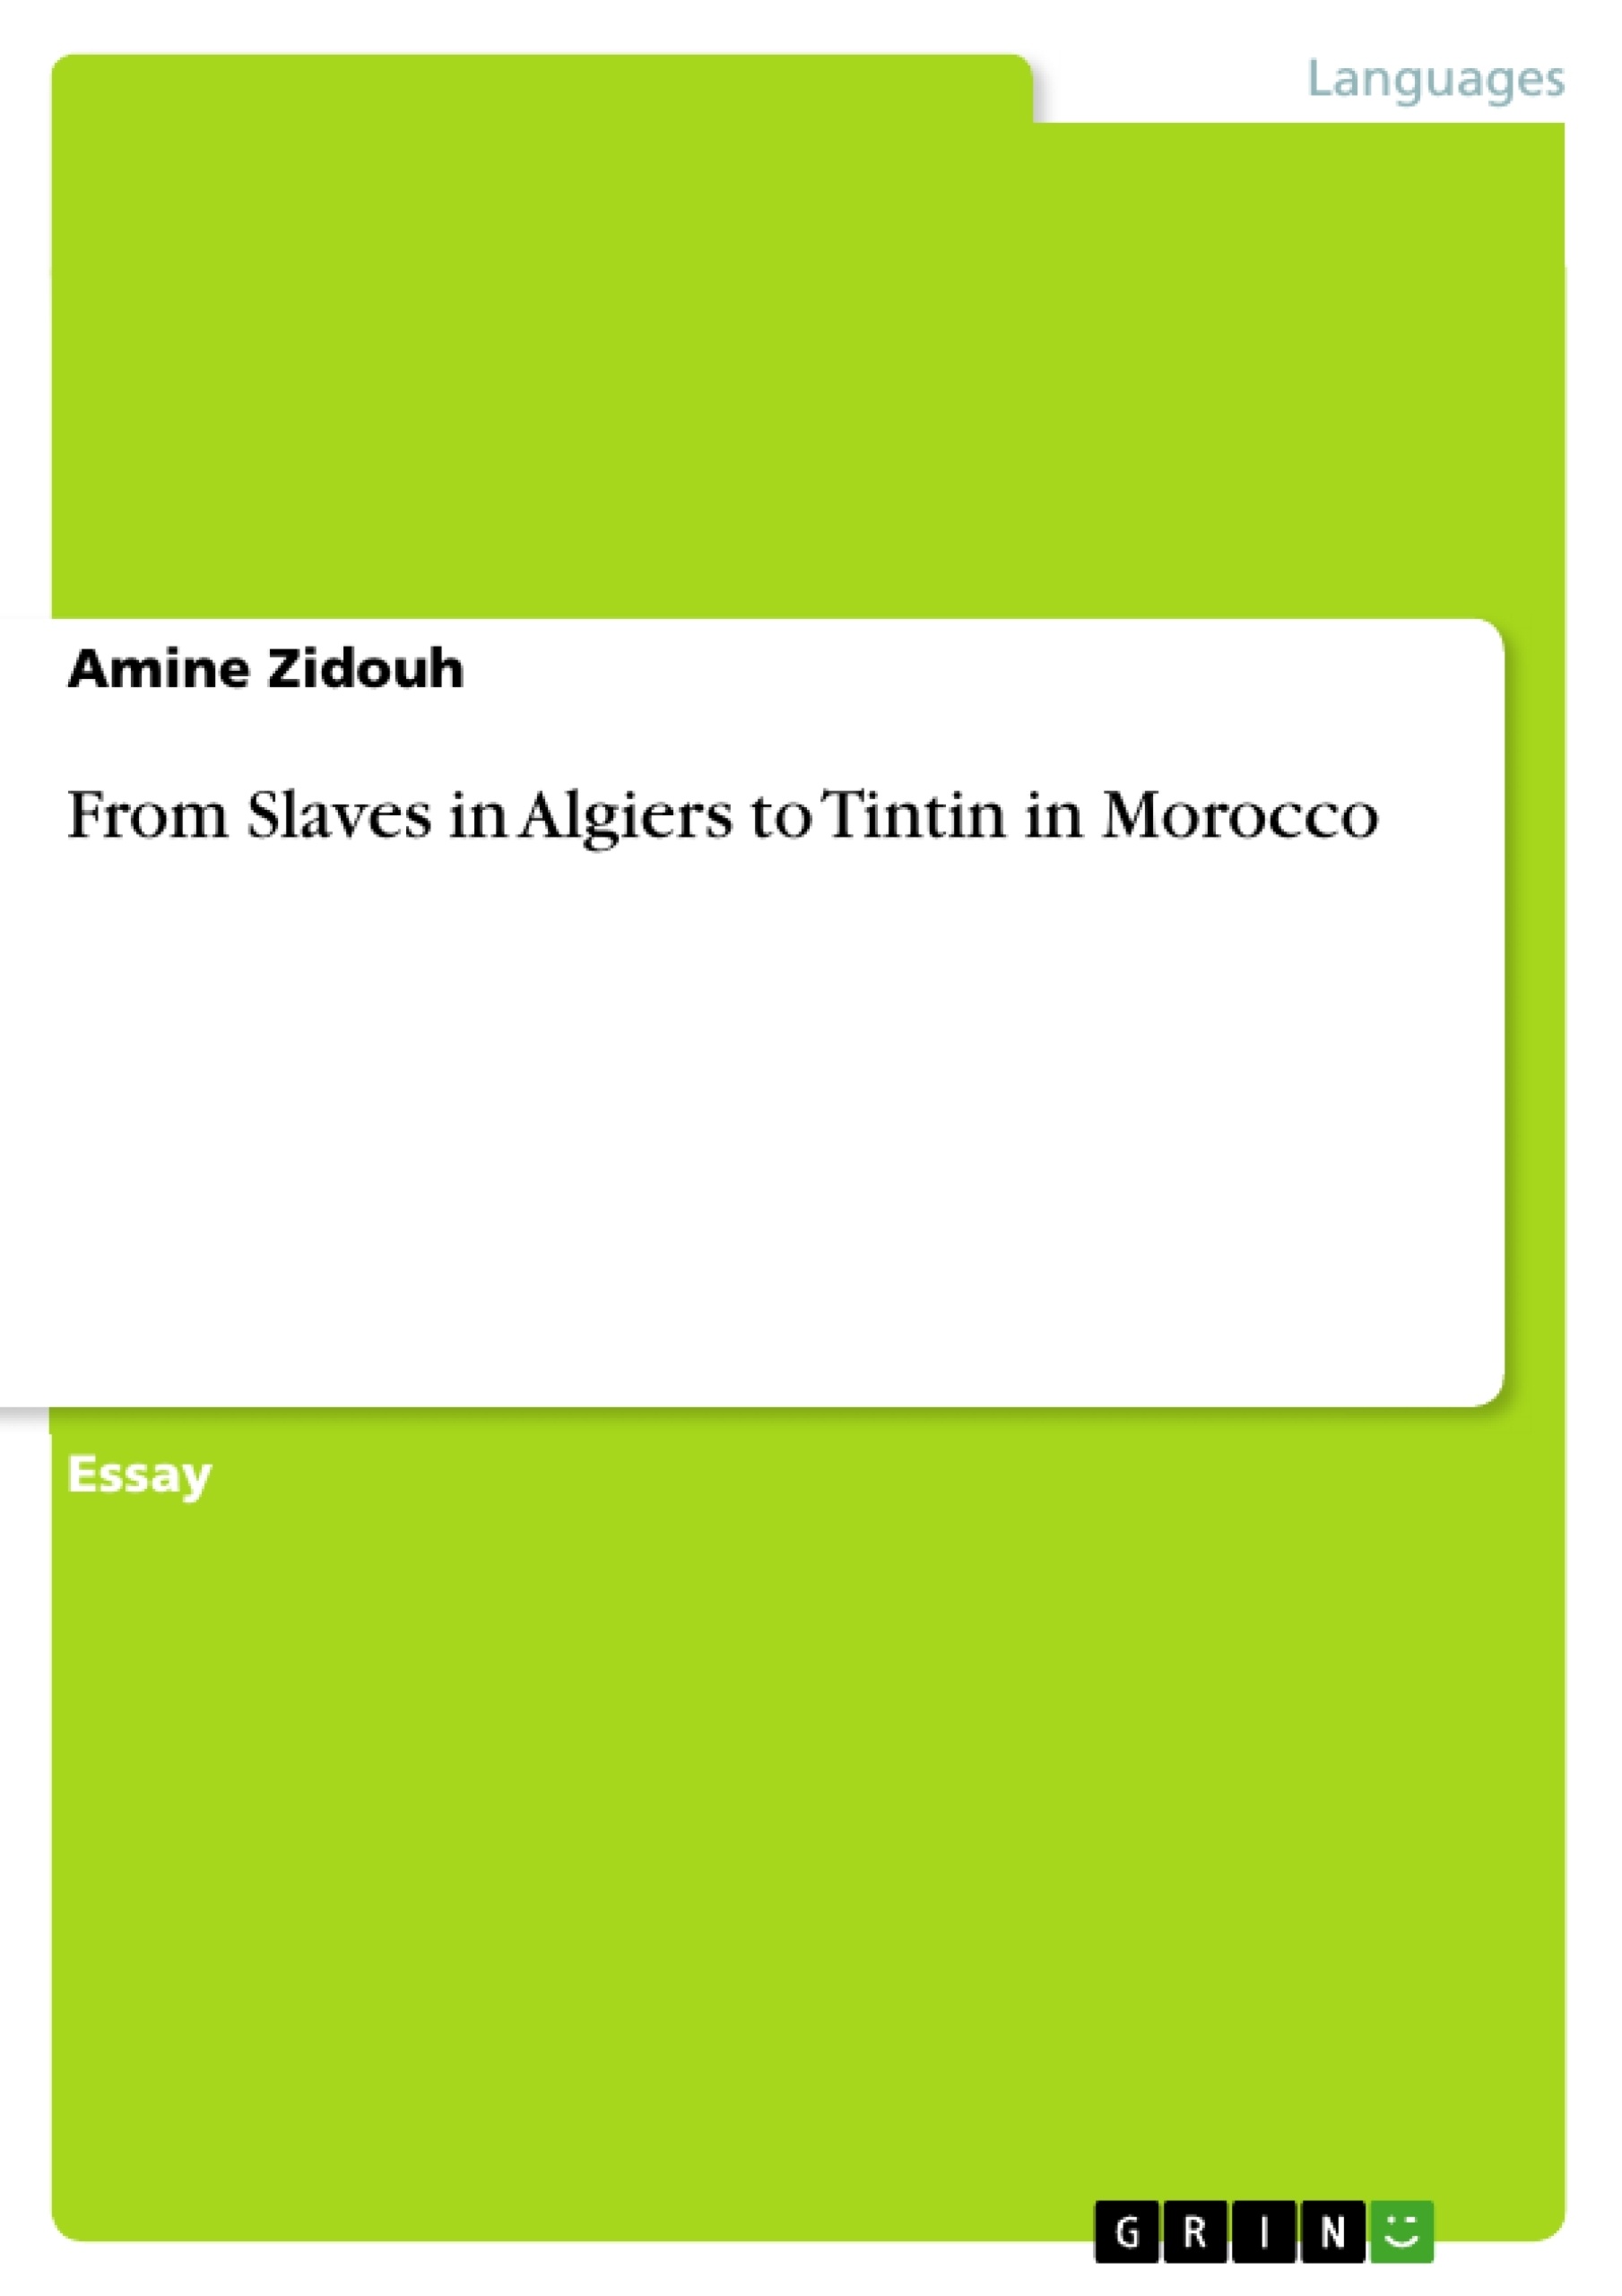 Titel: From Slaves in Algiers to Tintin in Morocco